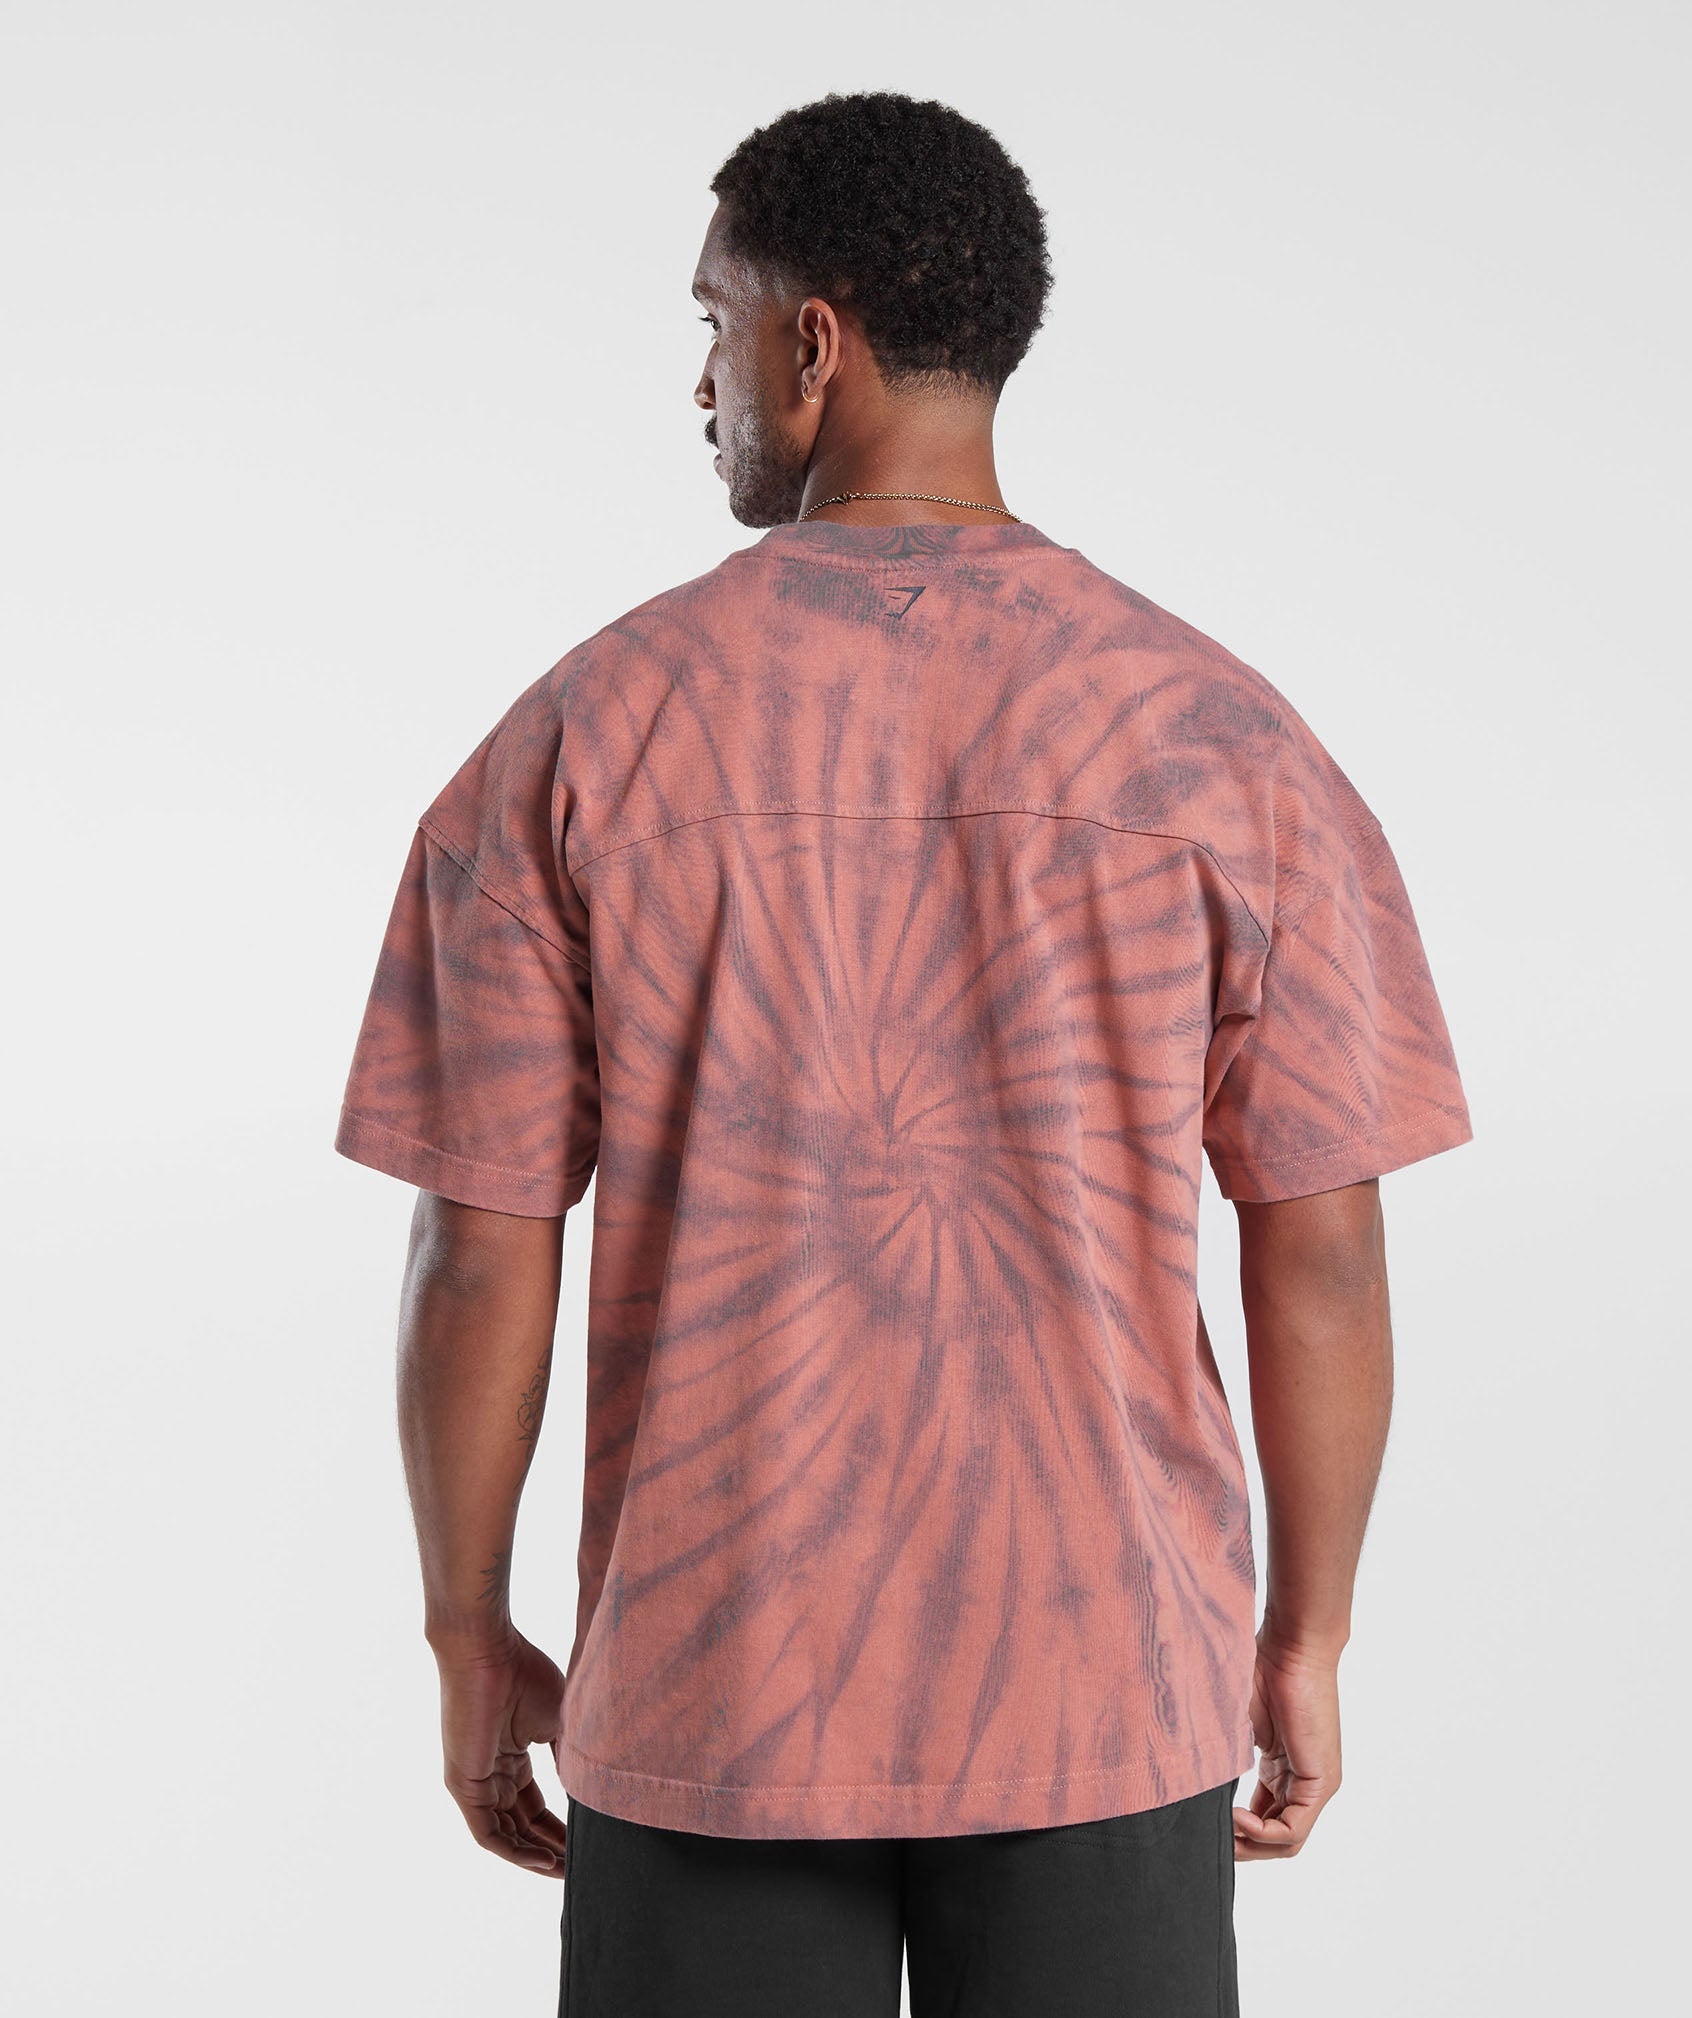 Rest Day T-Shirt in Terracotta Pink/Dusty Maroon/Spiral Optic Wash - view 2